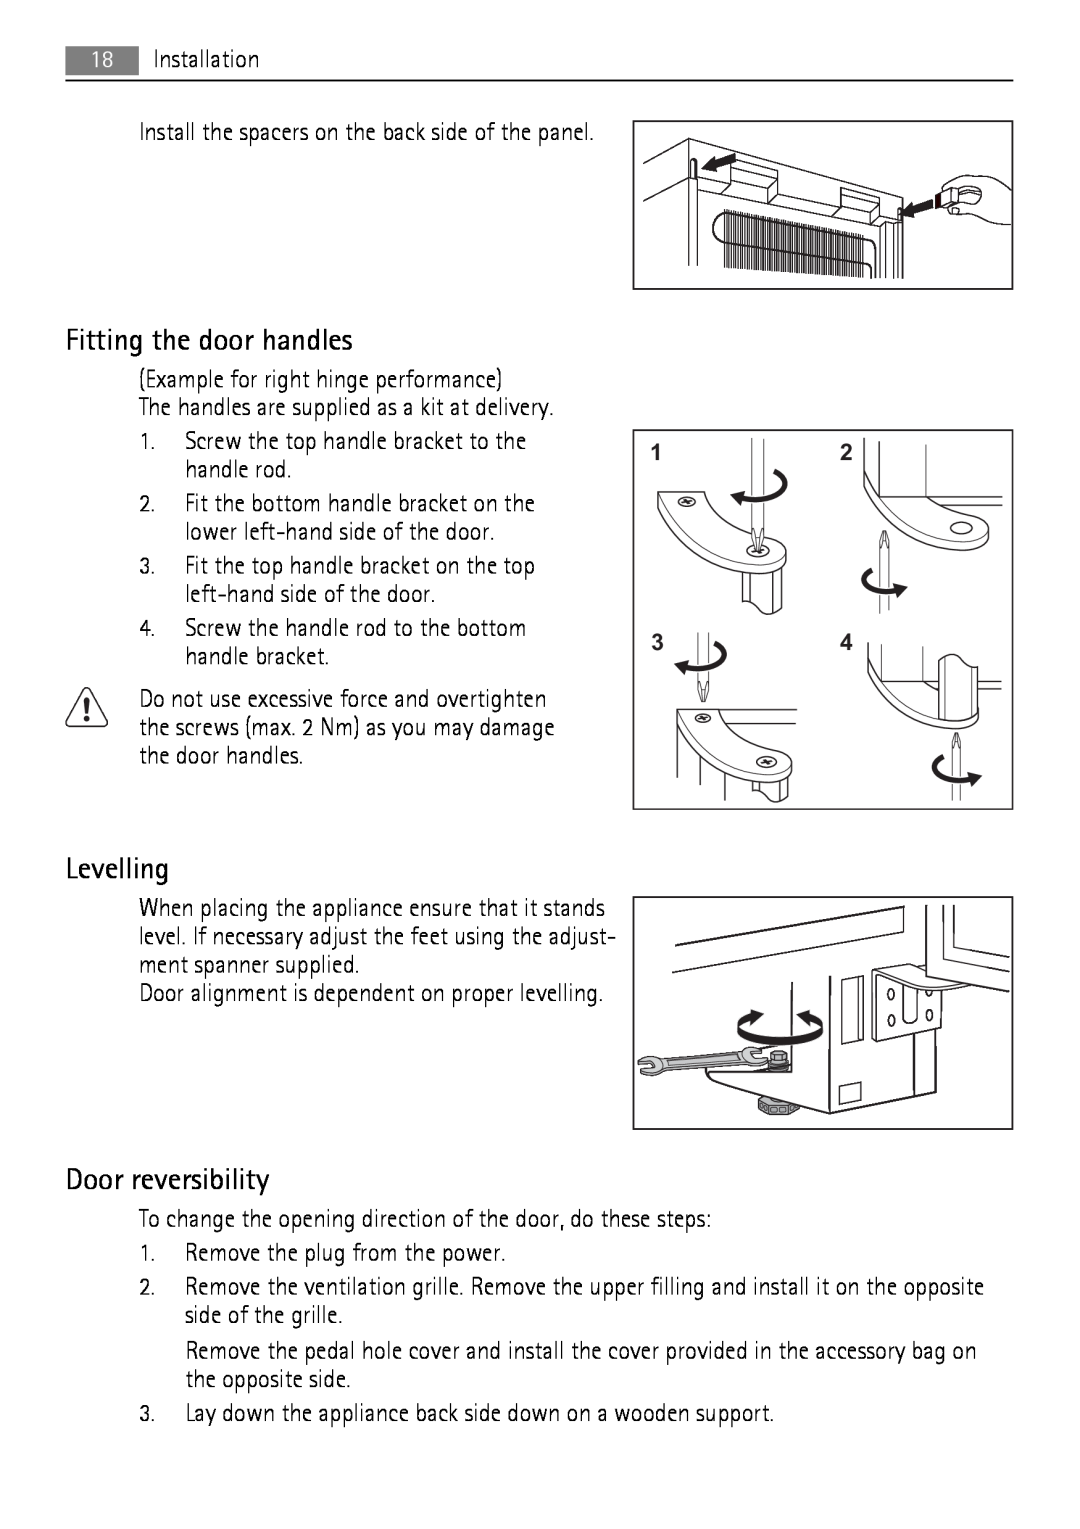 AEG A62900GSW0, A62900GSX0 user manual Fitting the door handles, Levelling, Door reversibility 